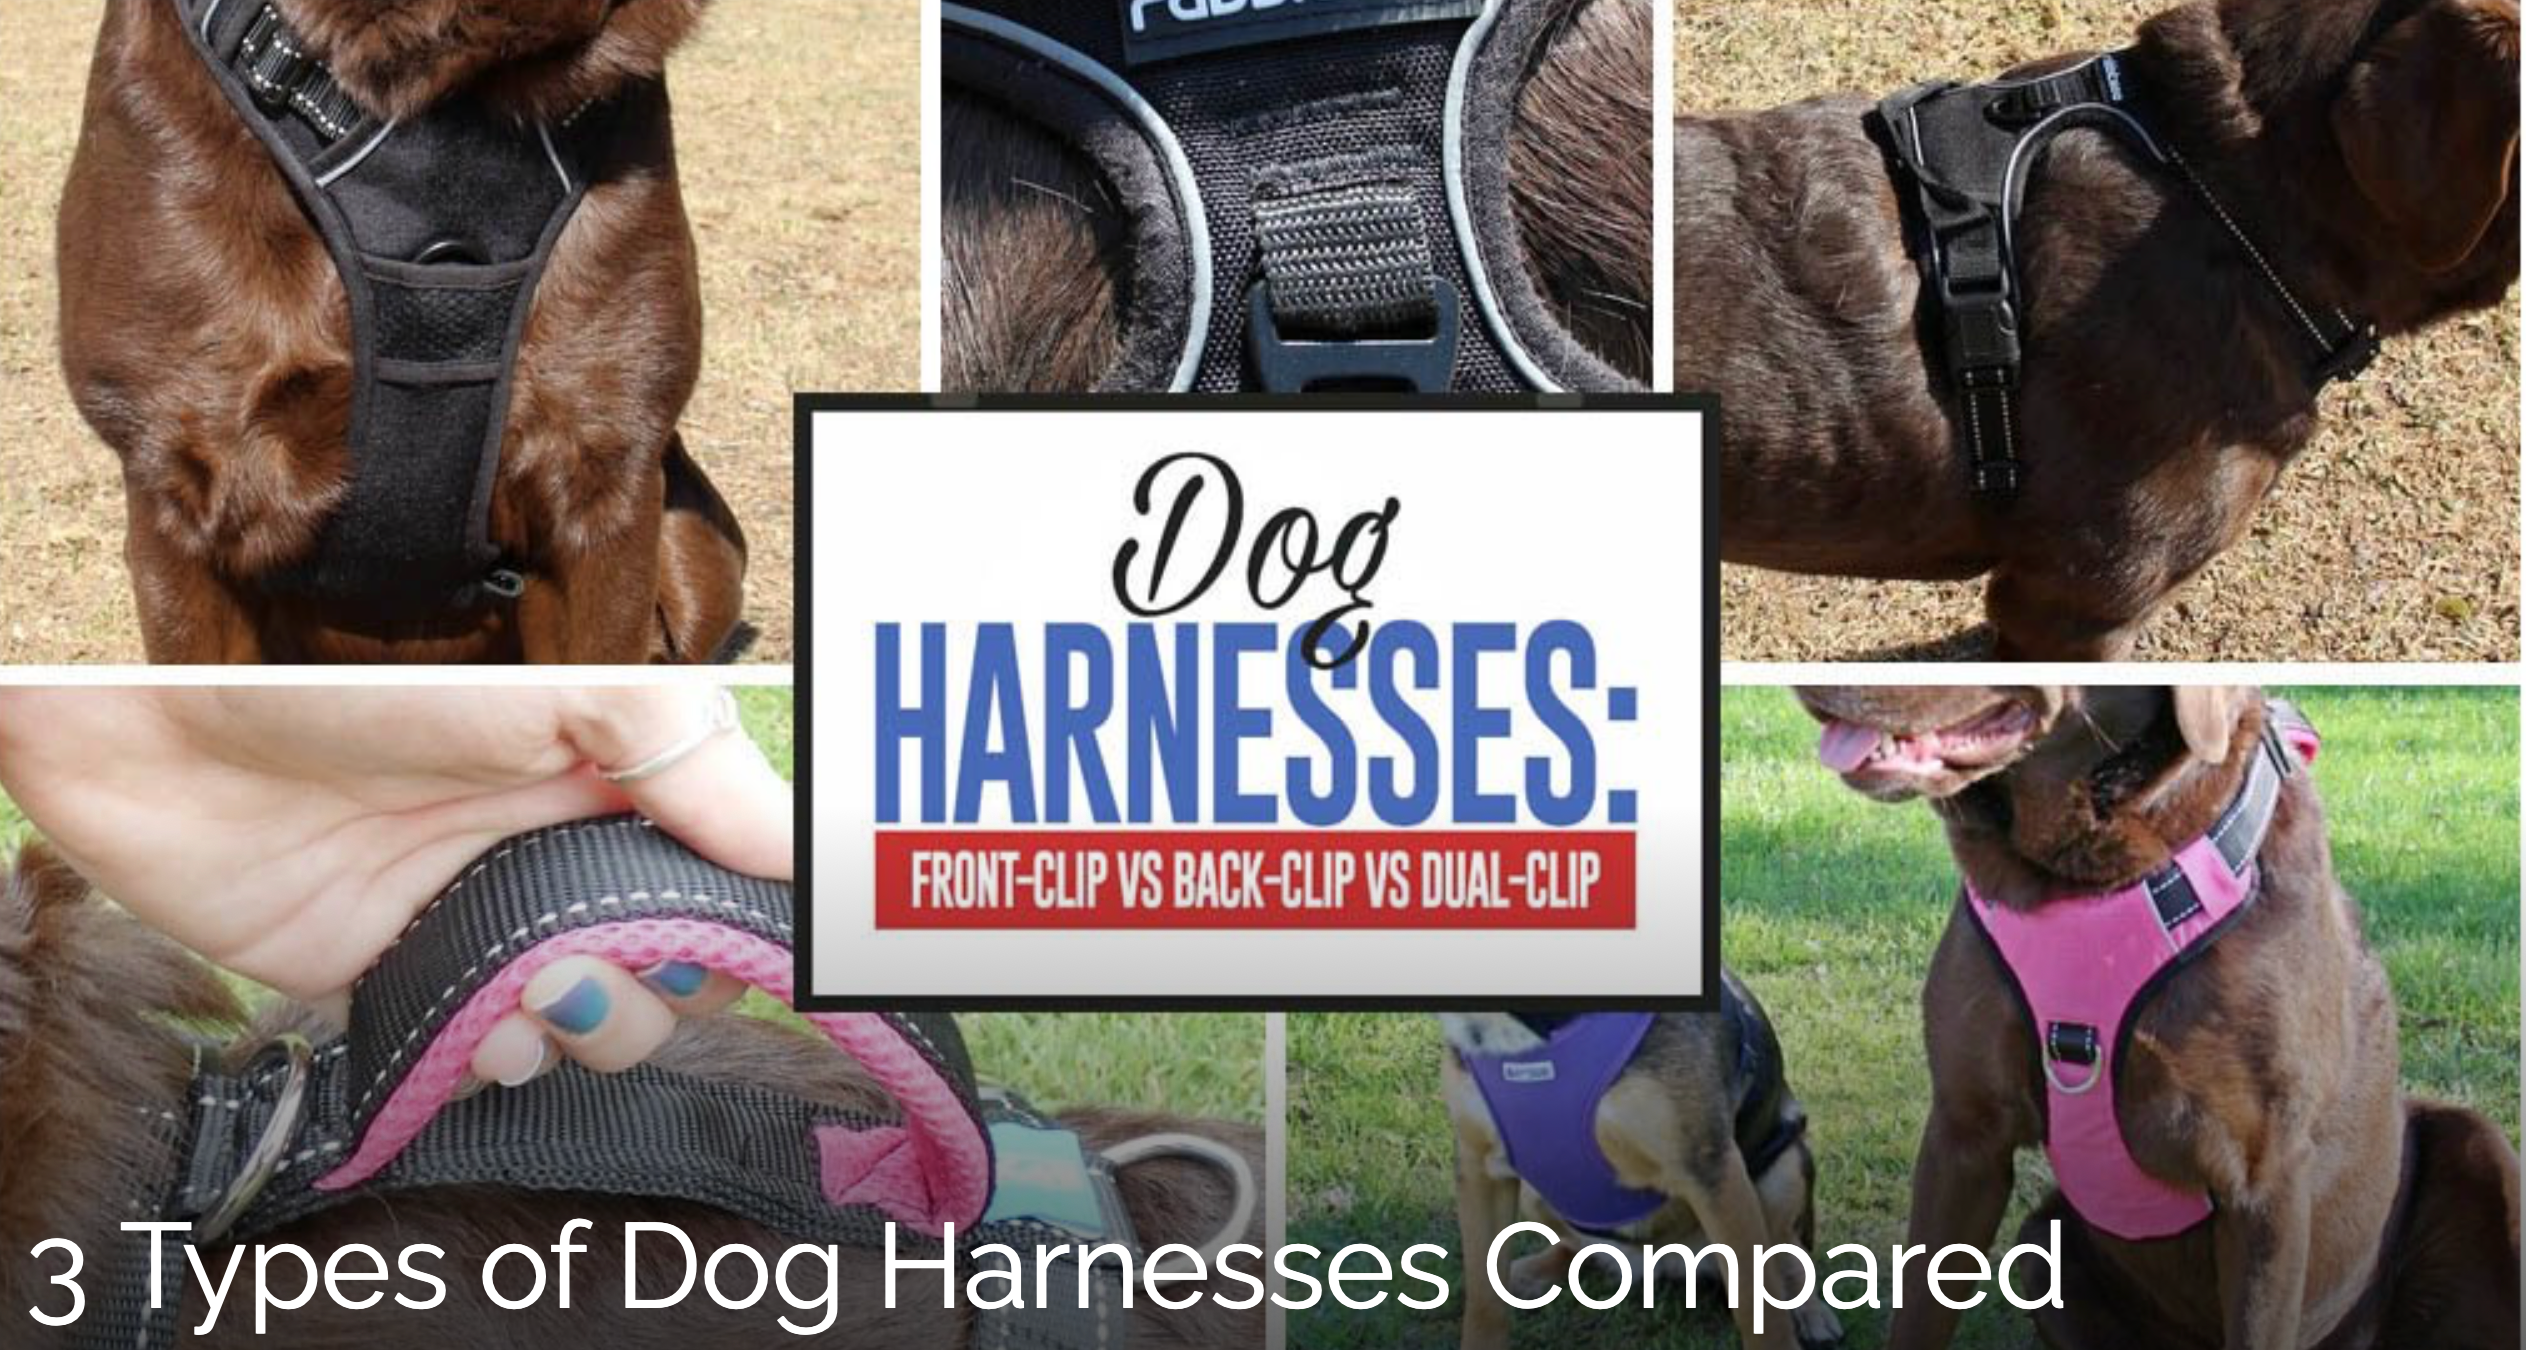 Comparing 3 Types of Dog Harnesses